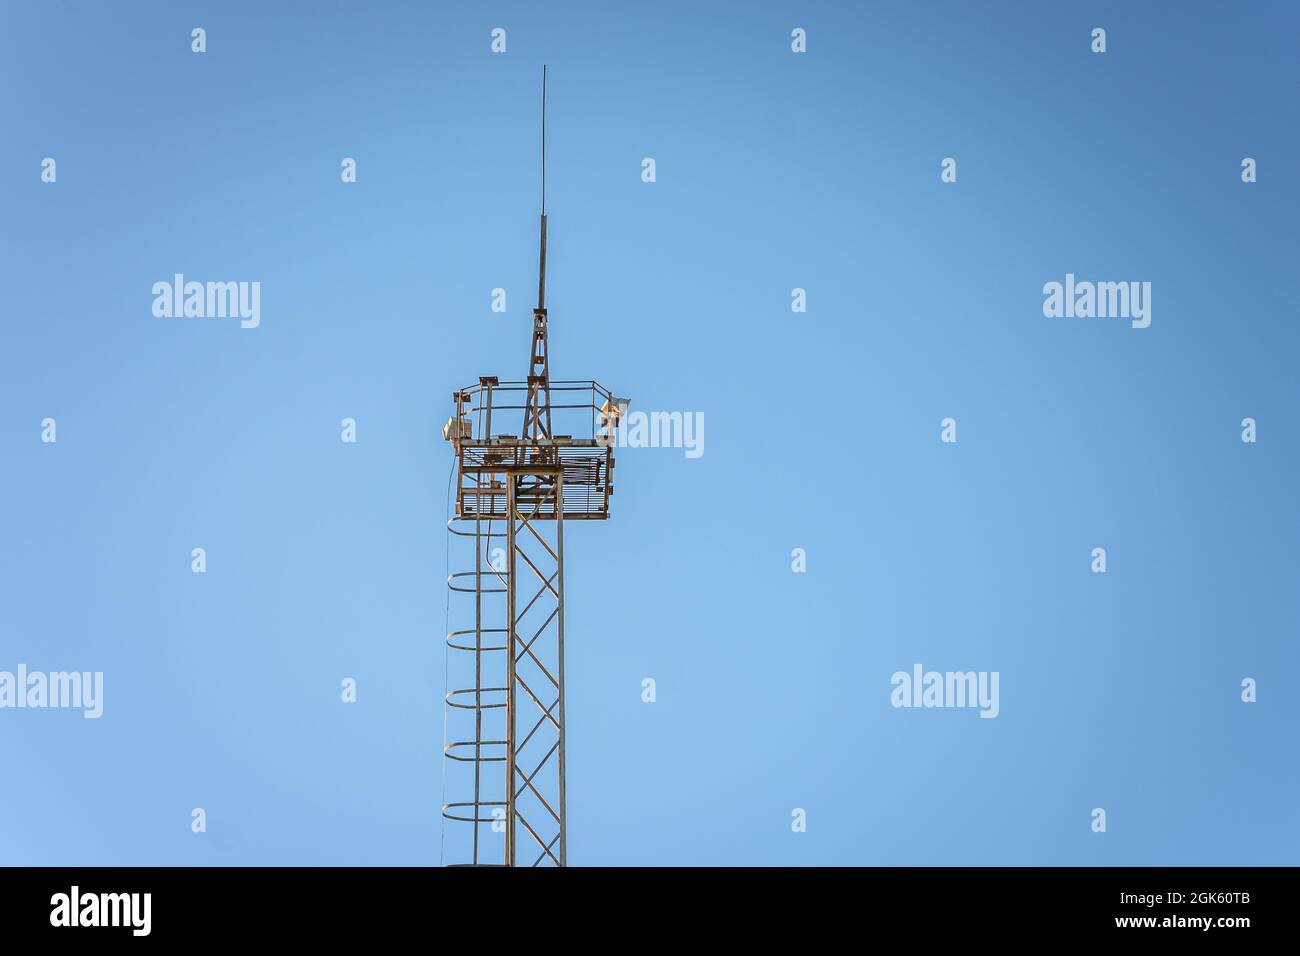 A metal tower with a platform at the top with a lighting system and a lightning rod Stock Photo